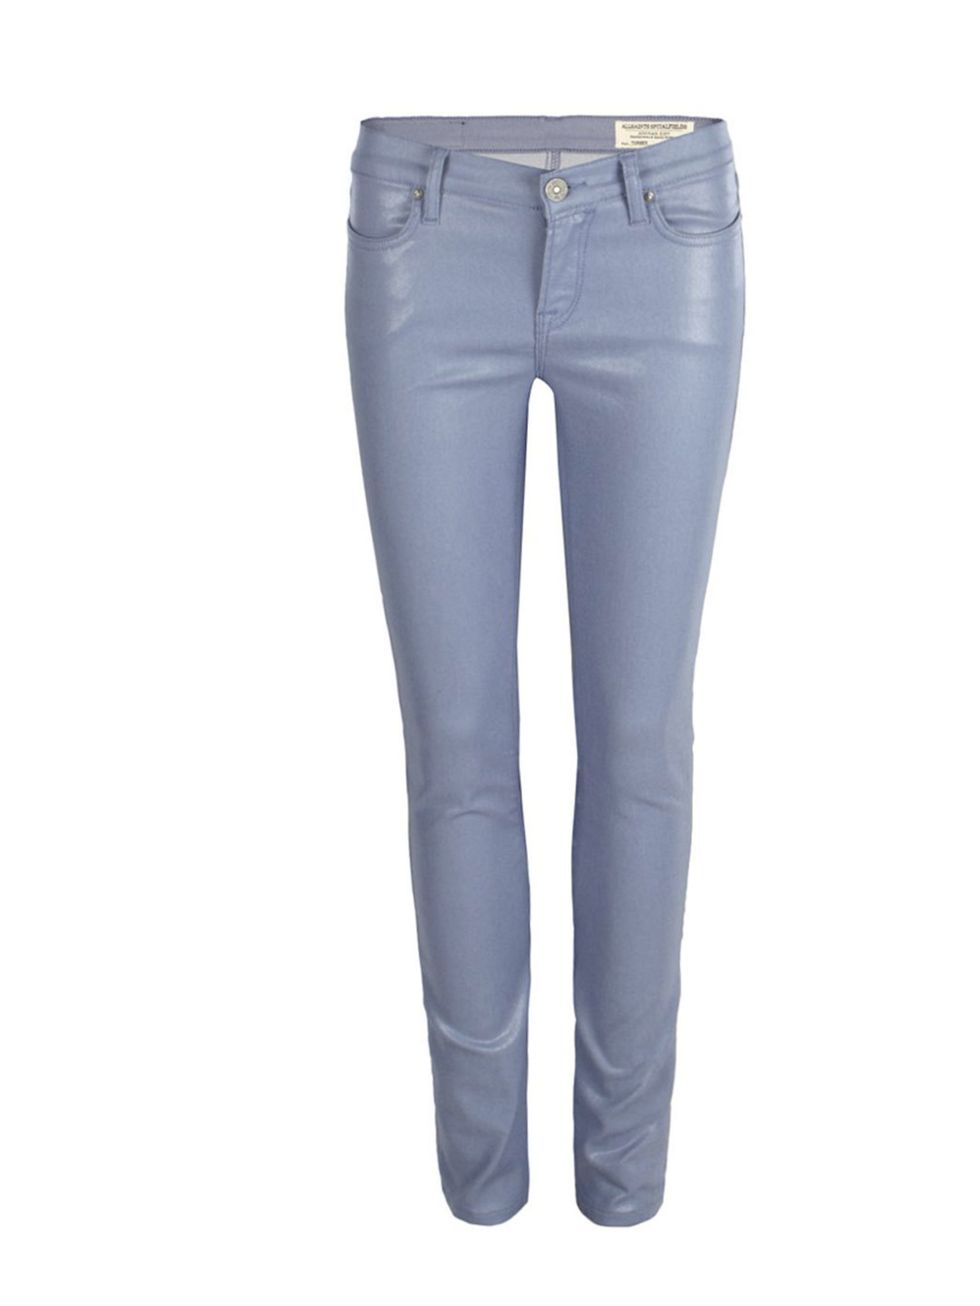 <p>Denim has been given a new season makeover over at All Saints with their powder blue waxed jeans topping our shopping list <a href="http://www.allsaints.com/women/jeans/allsaints-petrel-brodie-jeans/?colour=311&amp;category=23">All Saints</a> powder b